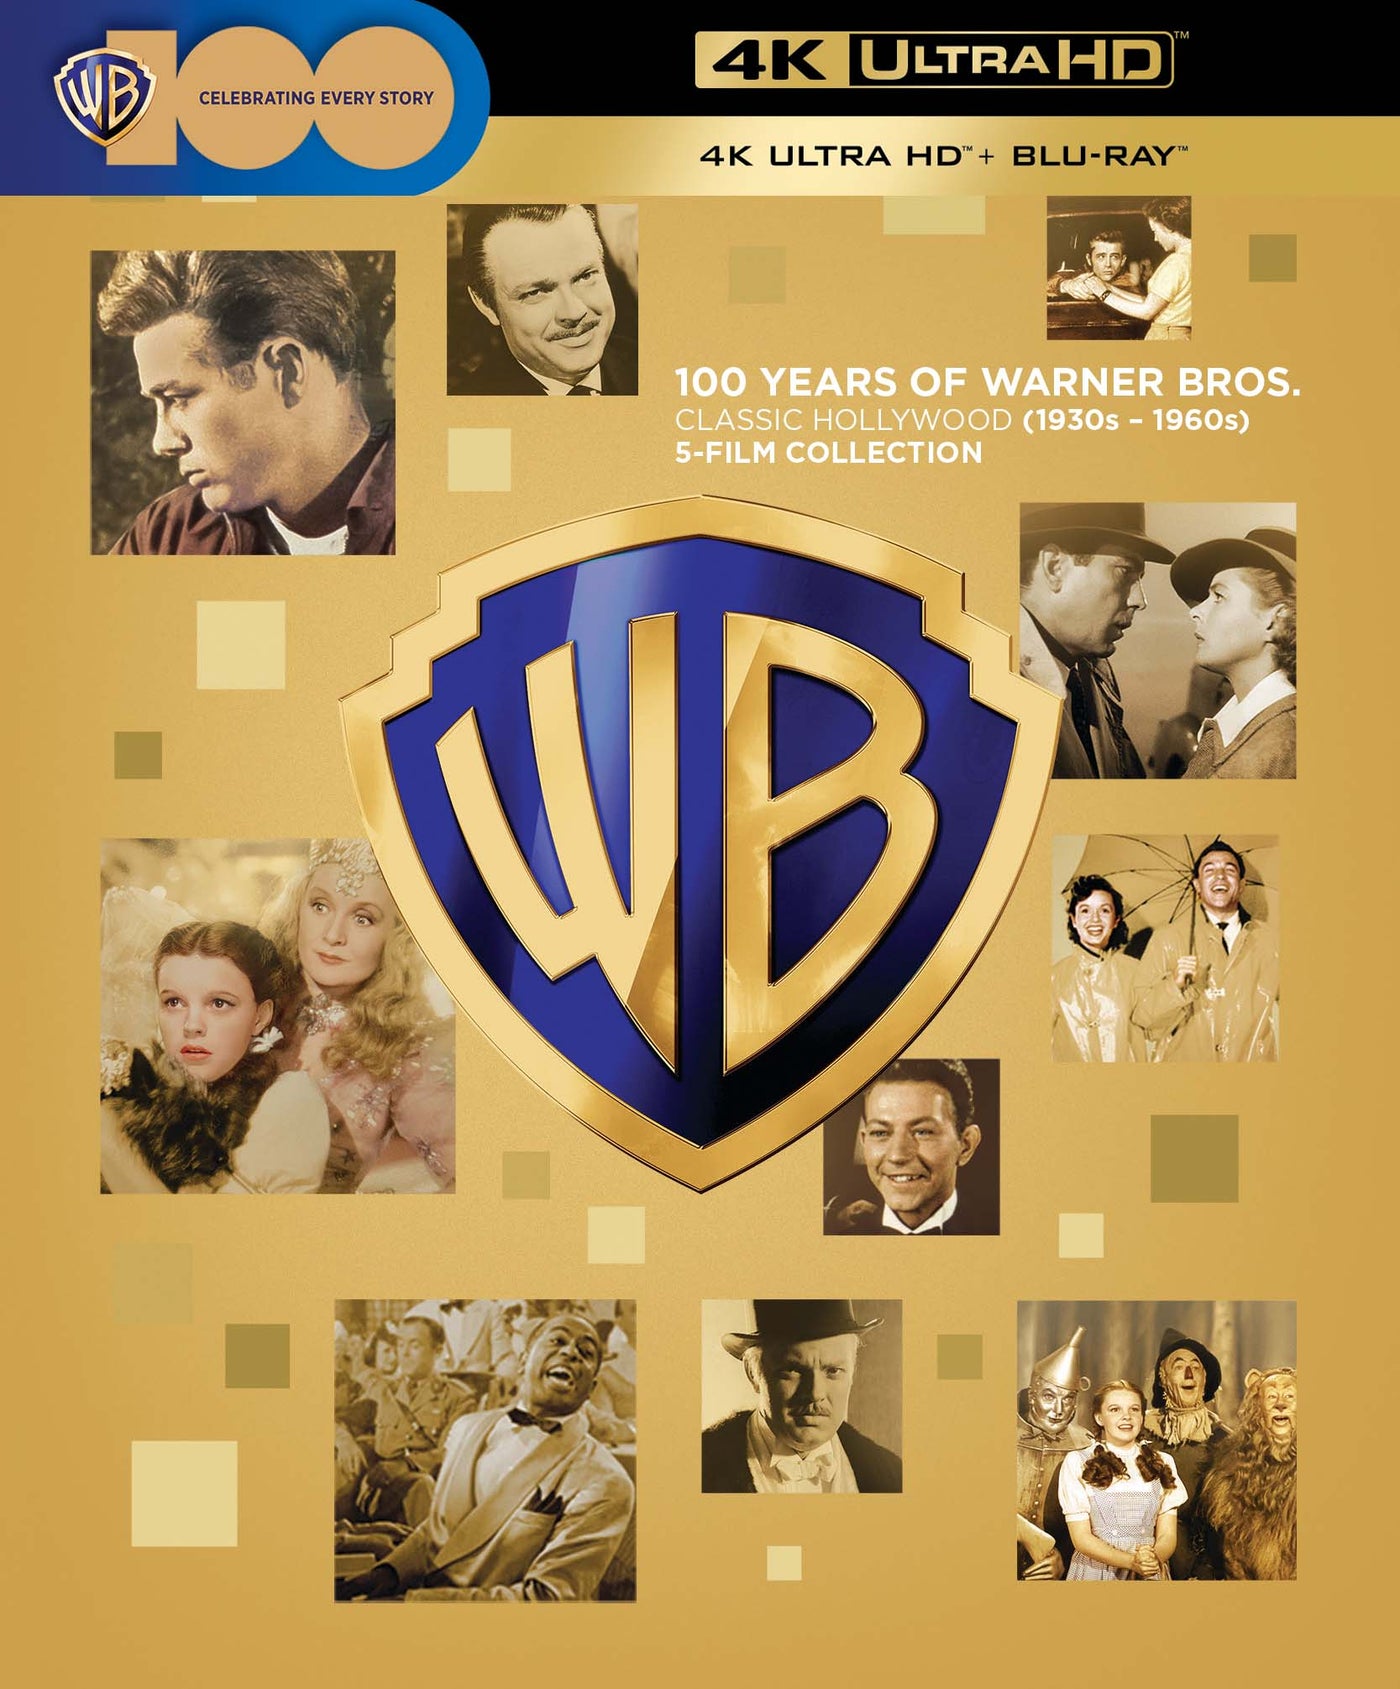 100 Years of Warner Bros. - Classic Hollywood 5-Film Collection (1930s - 1960s) (4K Ultra HD) (1939)